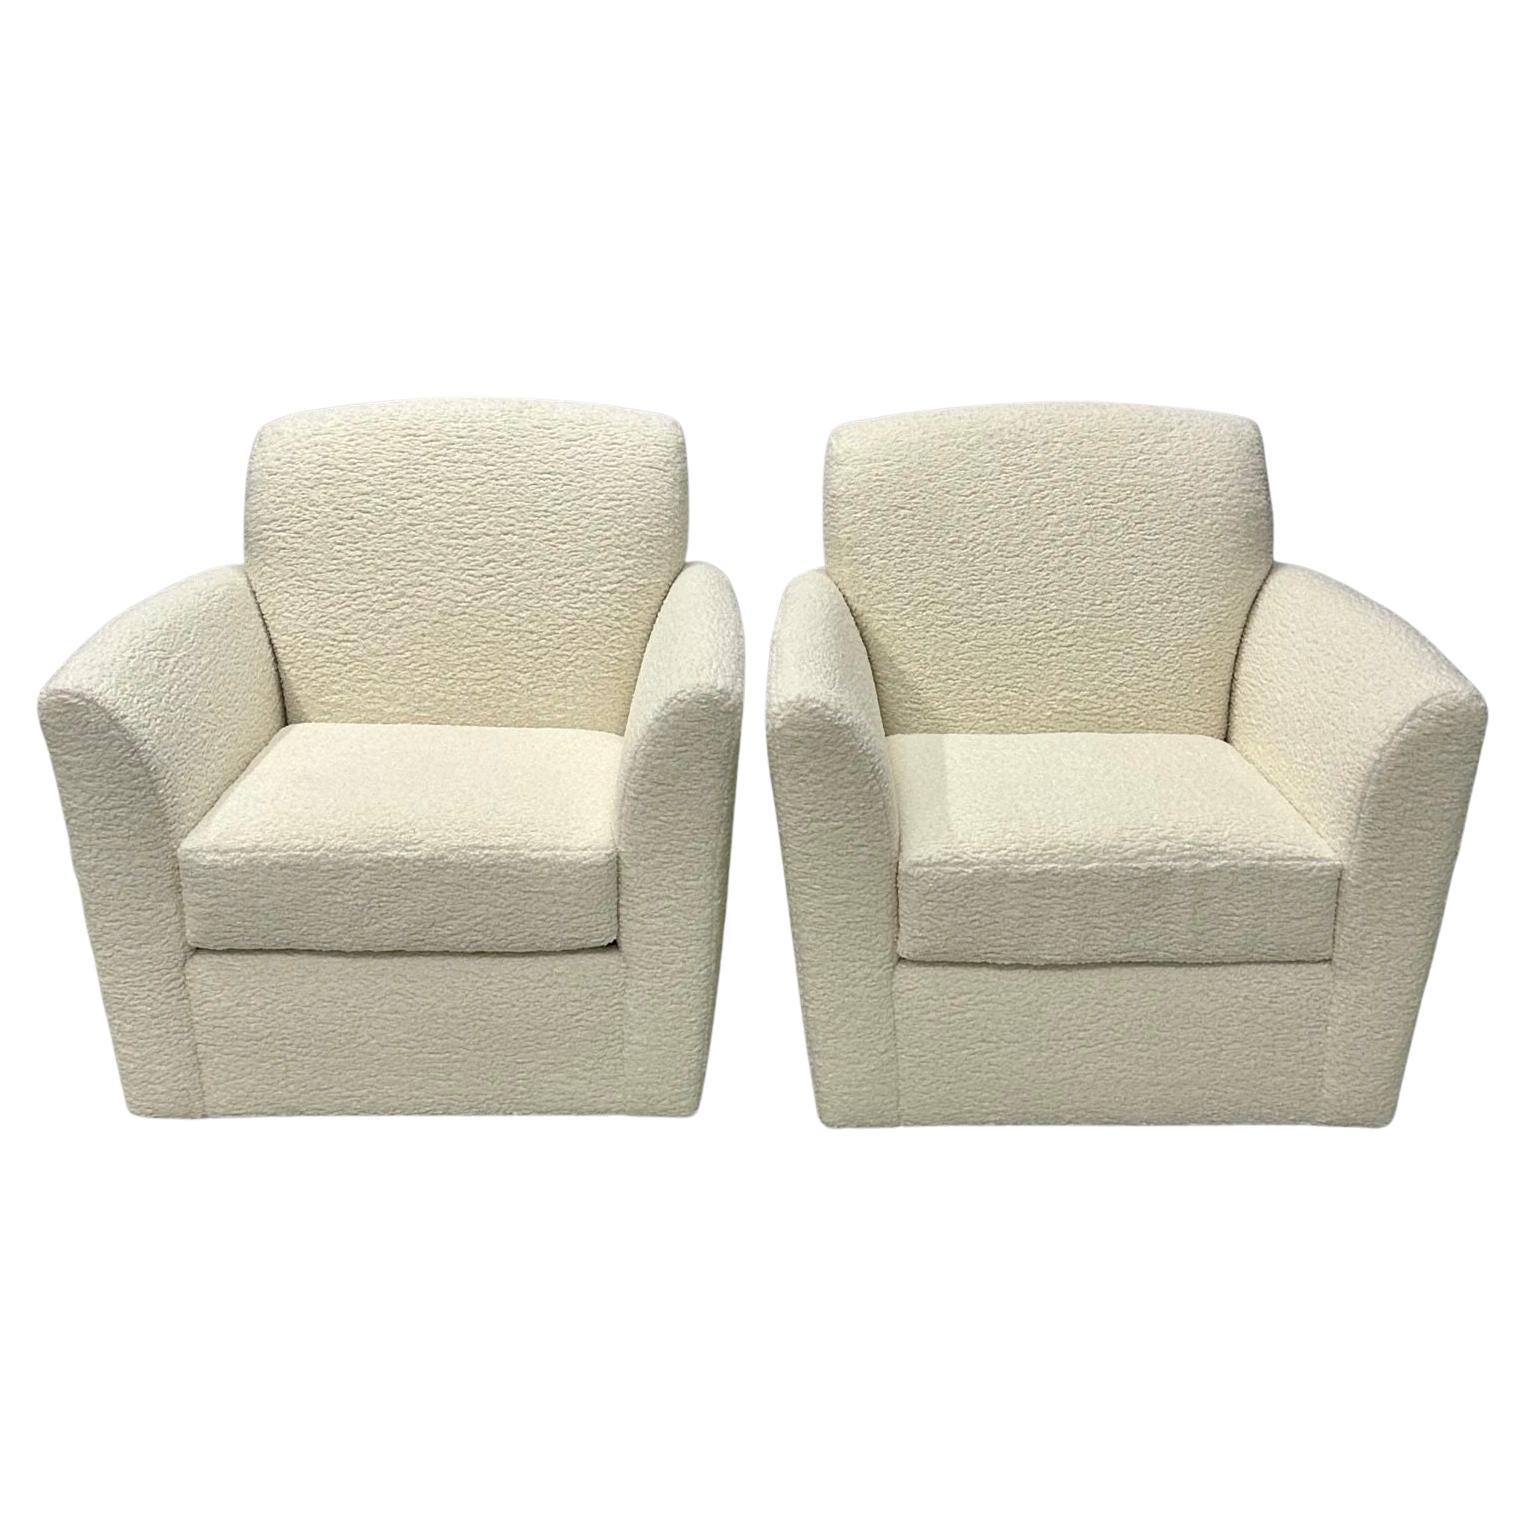 Pair of Mid-Century Modern Square White Boucle Rocking Lounge / Swivel Chairs For Sale